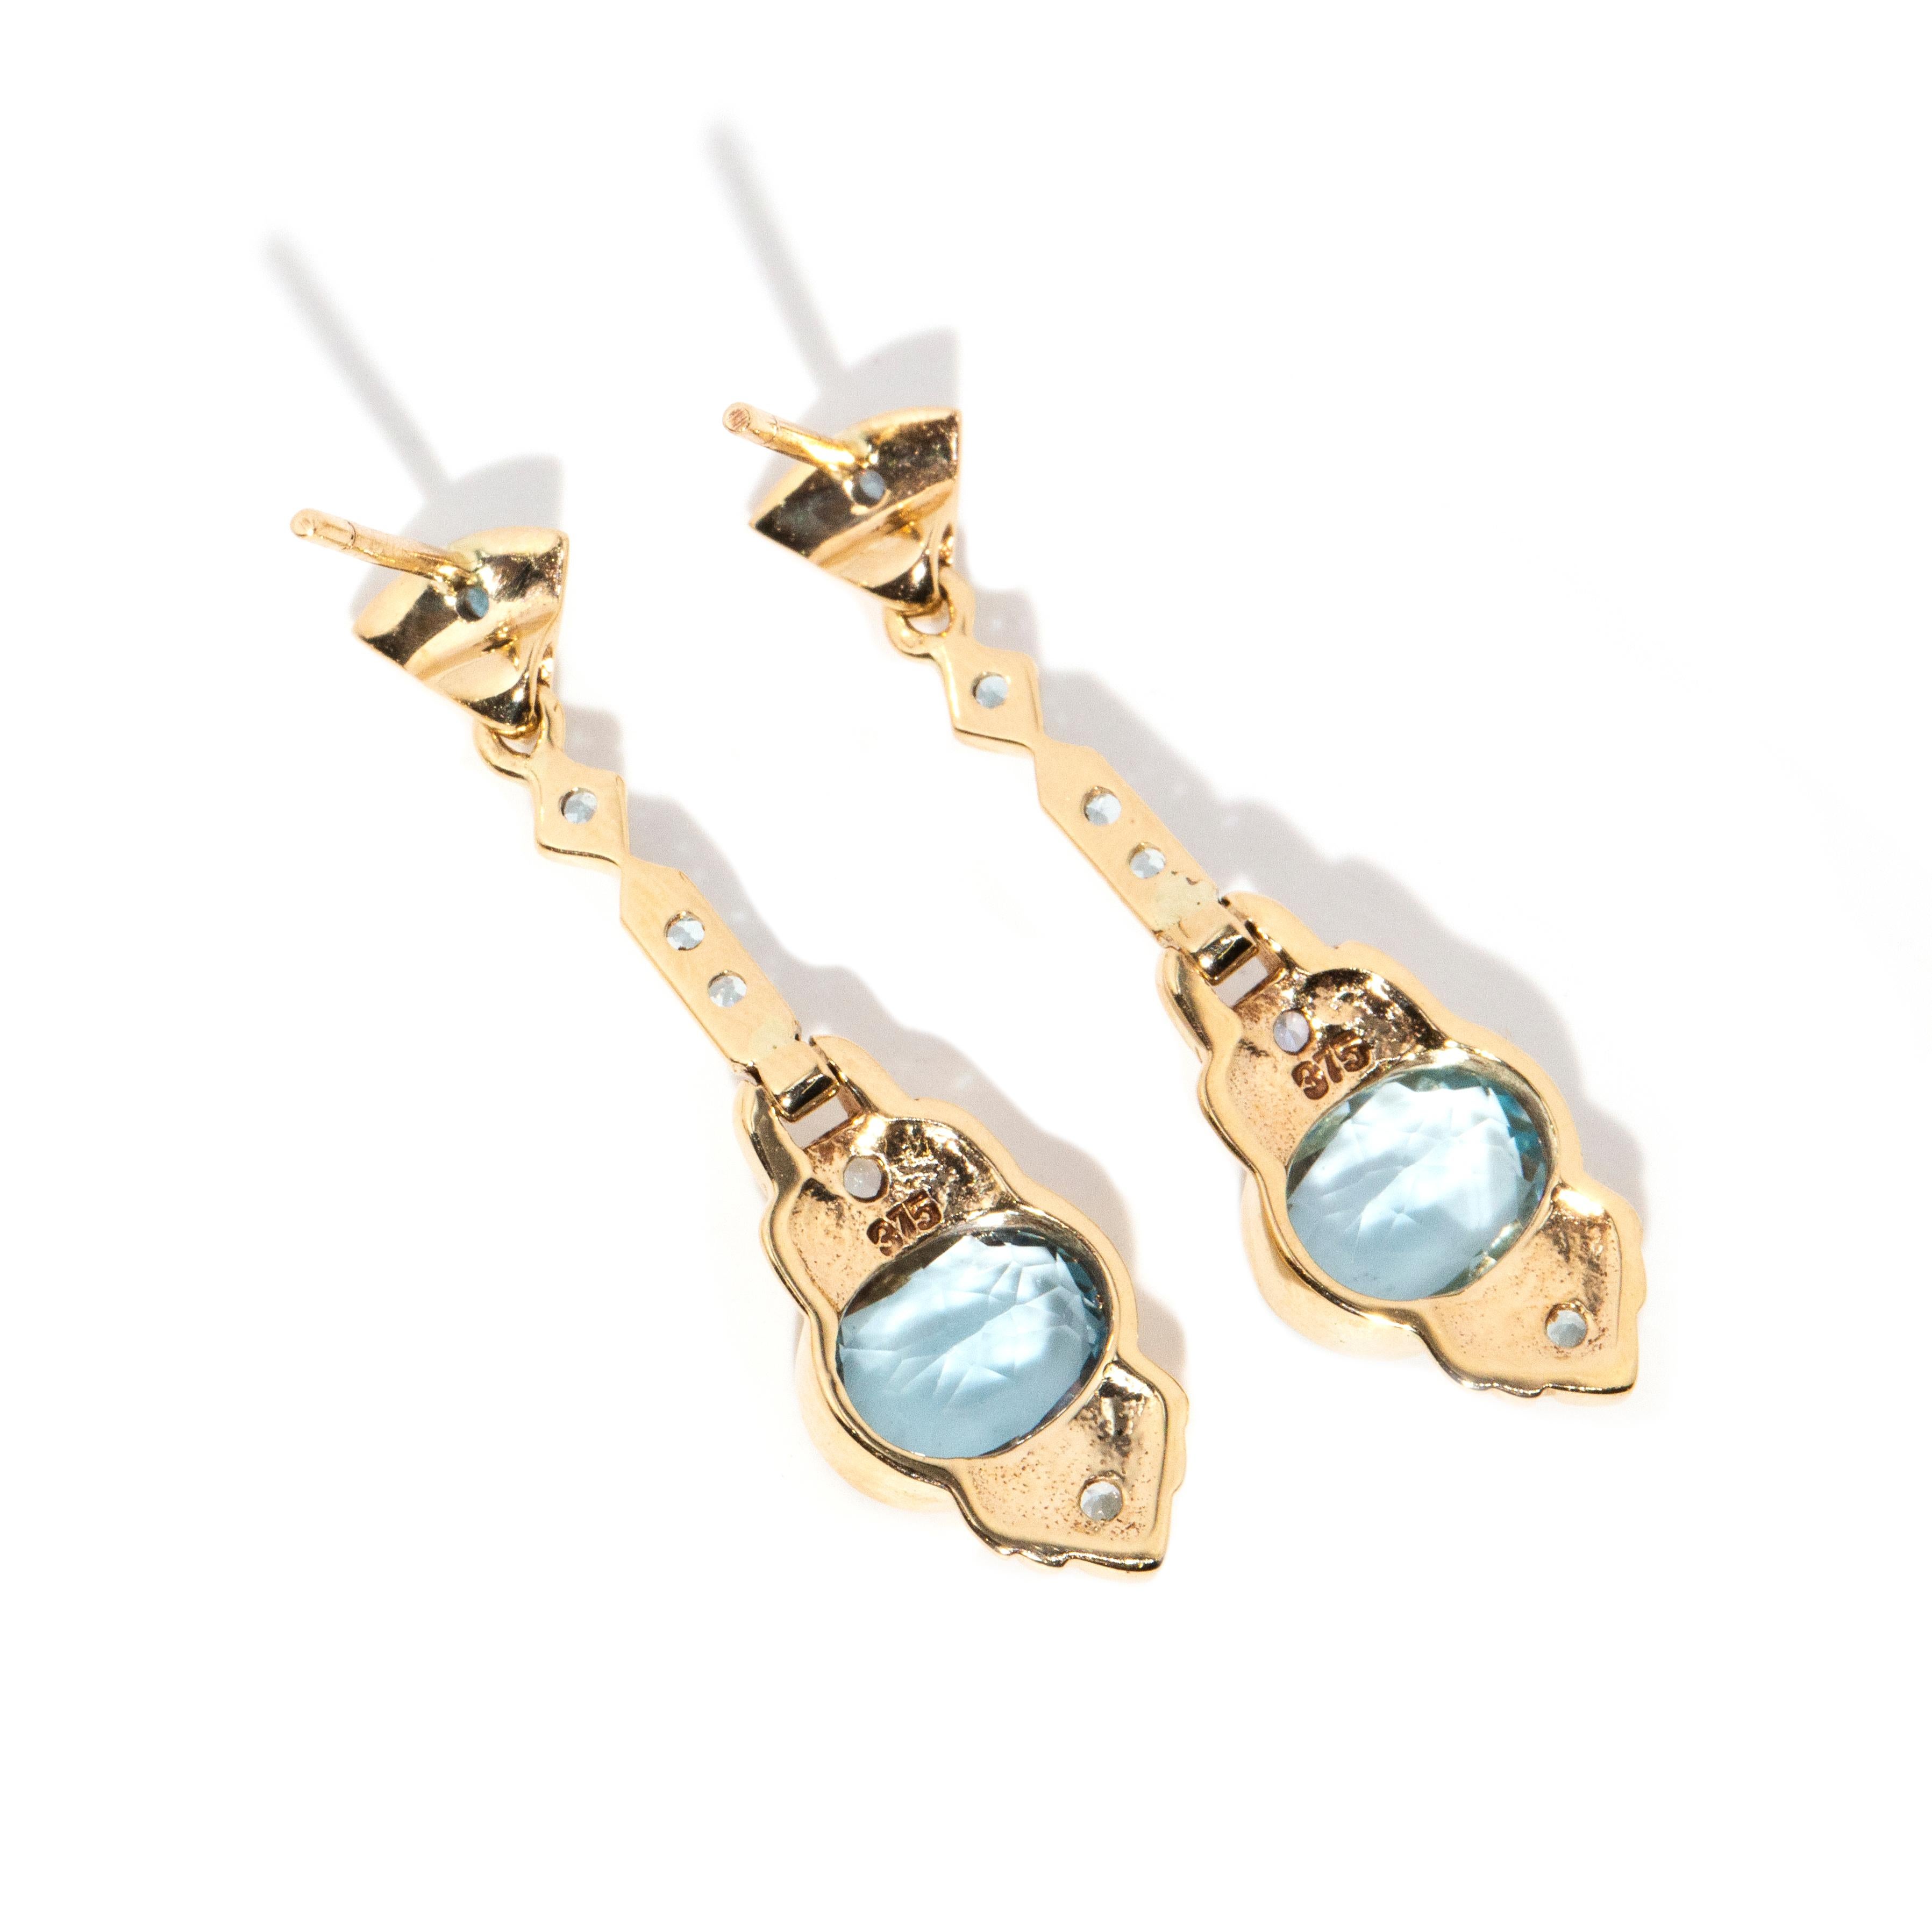 Vintage Inspired Bright Blue Topaz Art Deco Style Drop Earrings 9 Carat Gold 1